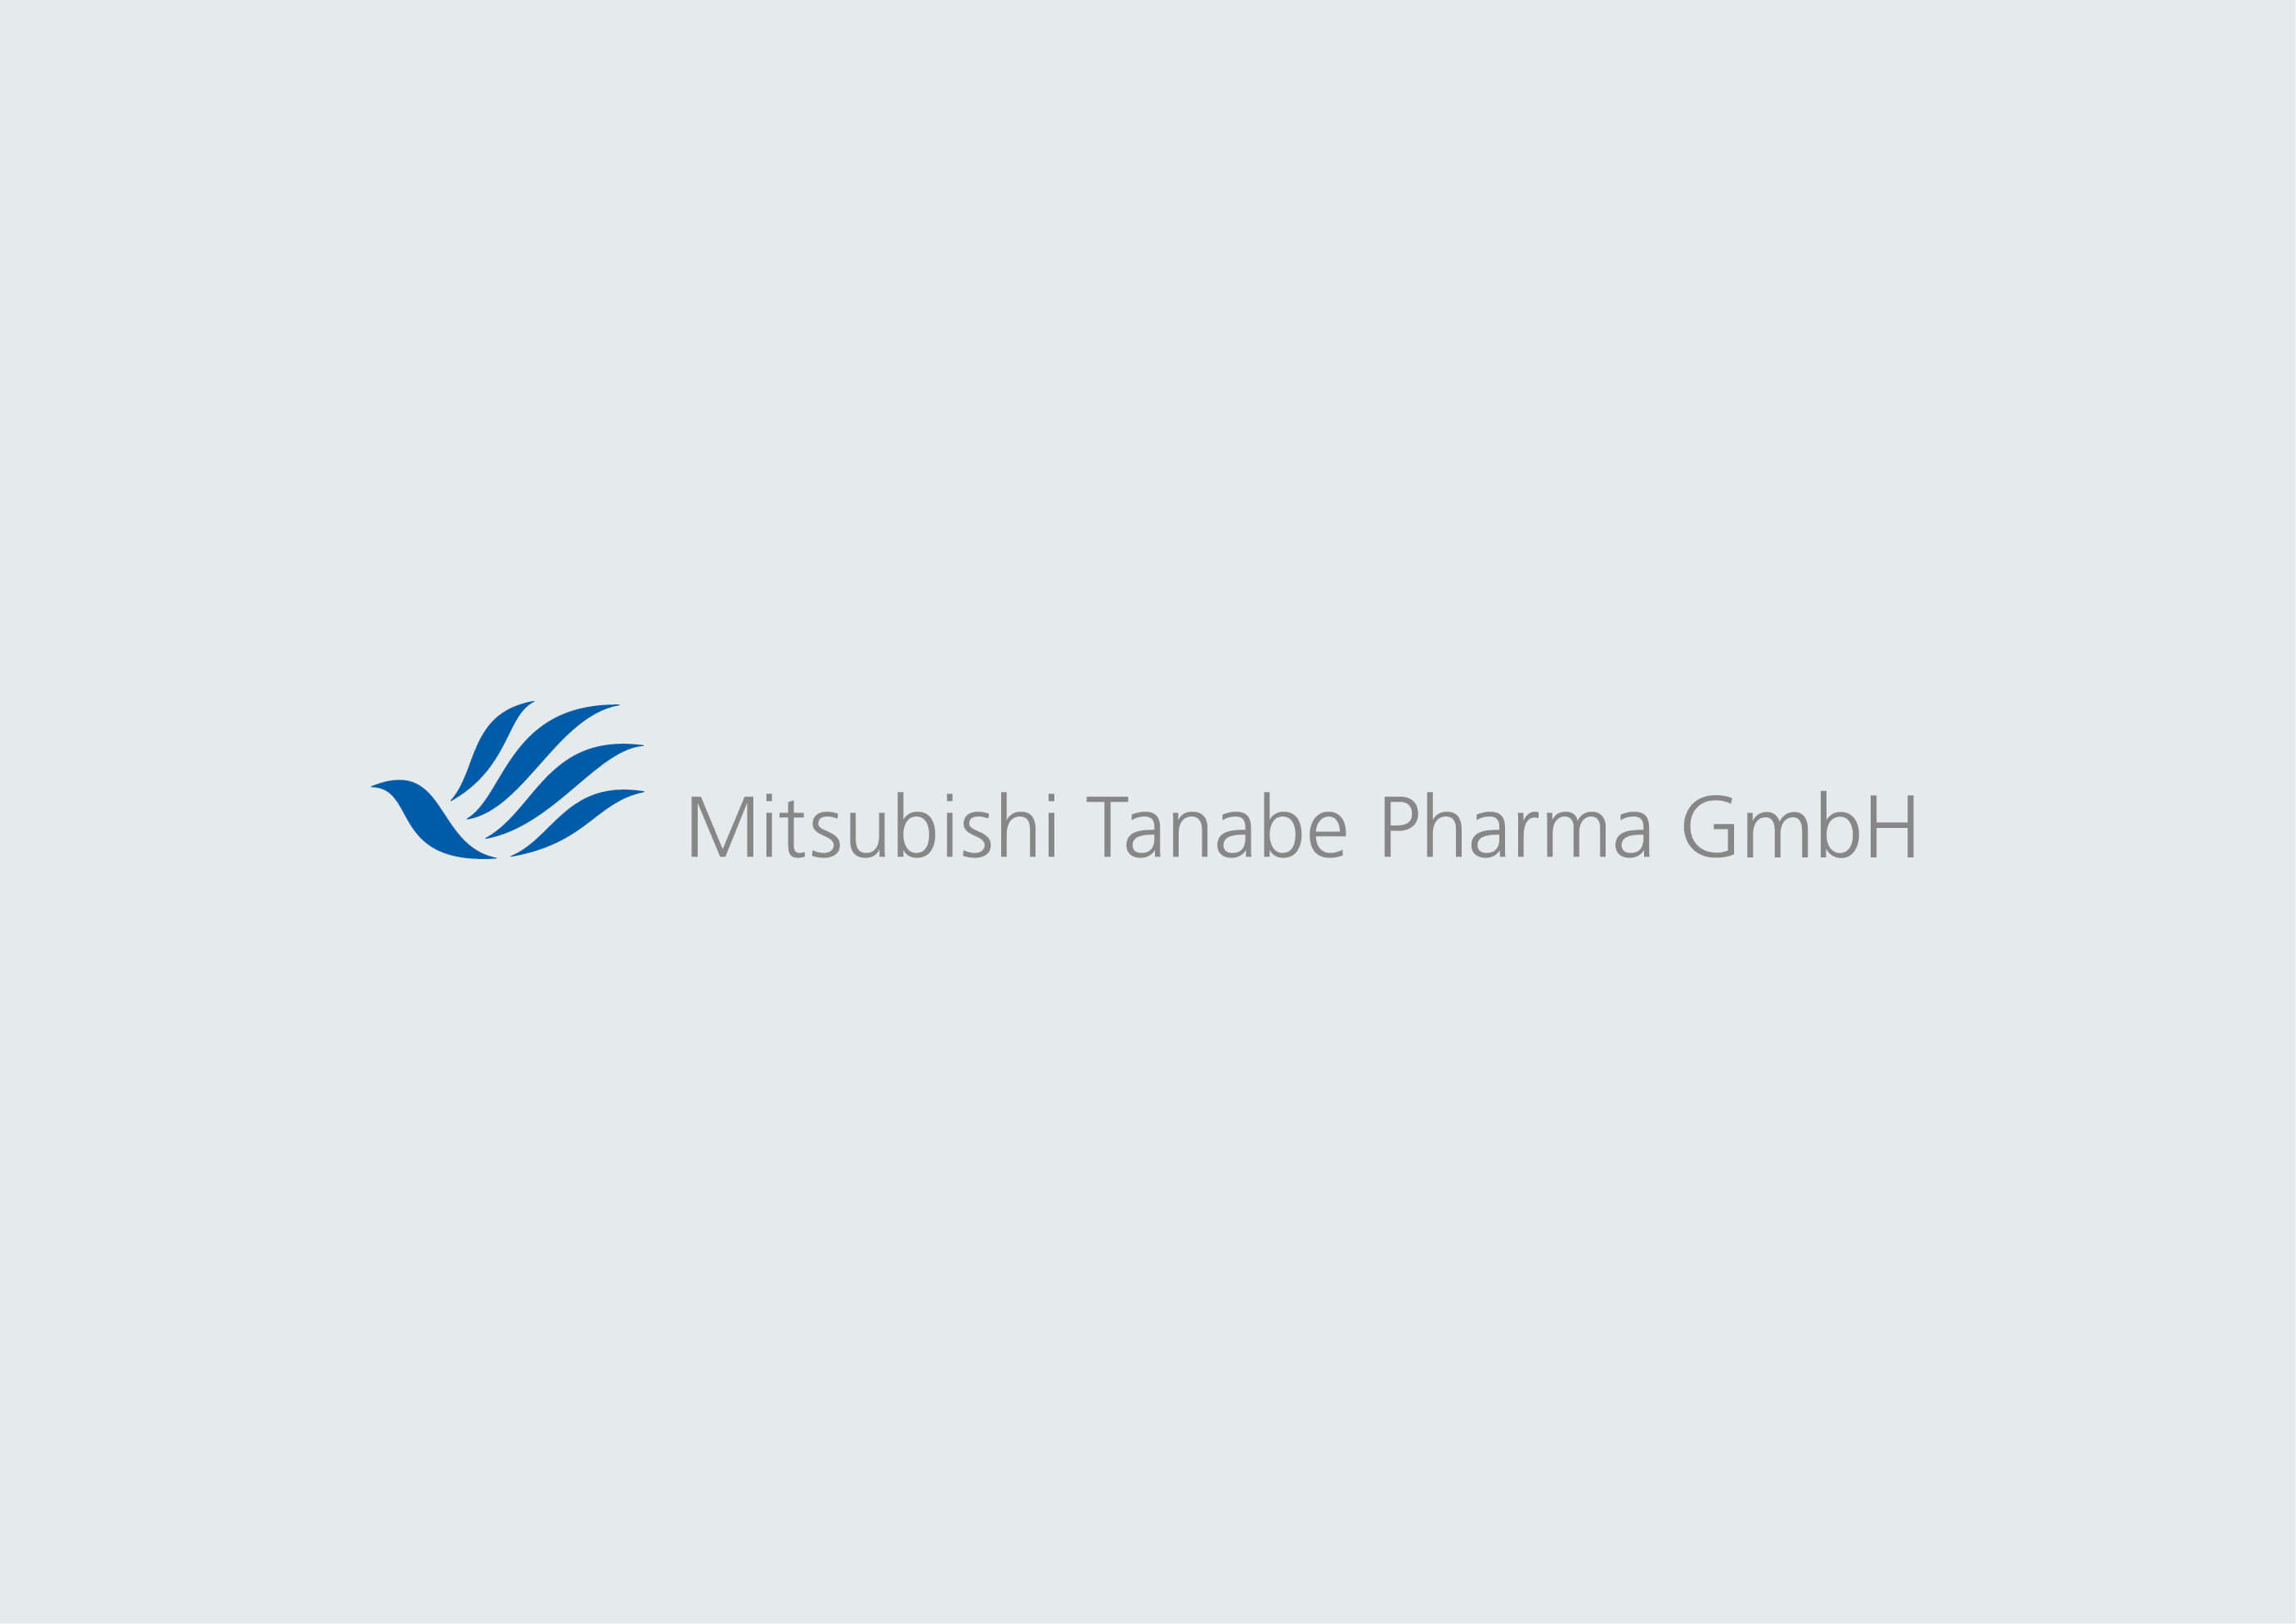 Mitsubishi Tanabe's Edaravone Receives NMPA's Approval for Amyotrophic Lateral Sclerosis (ALS)